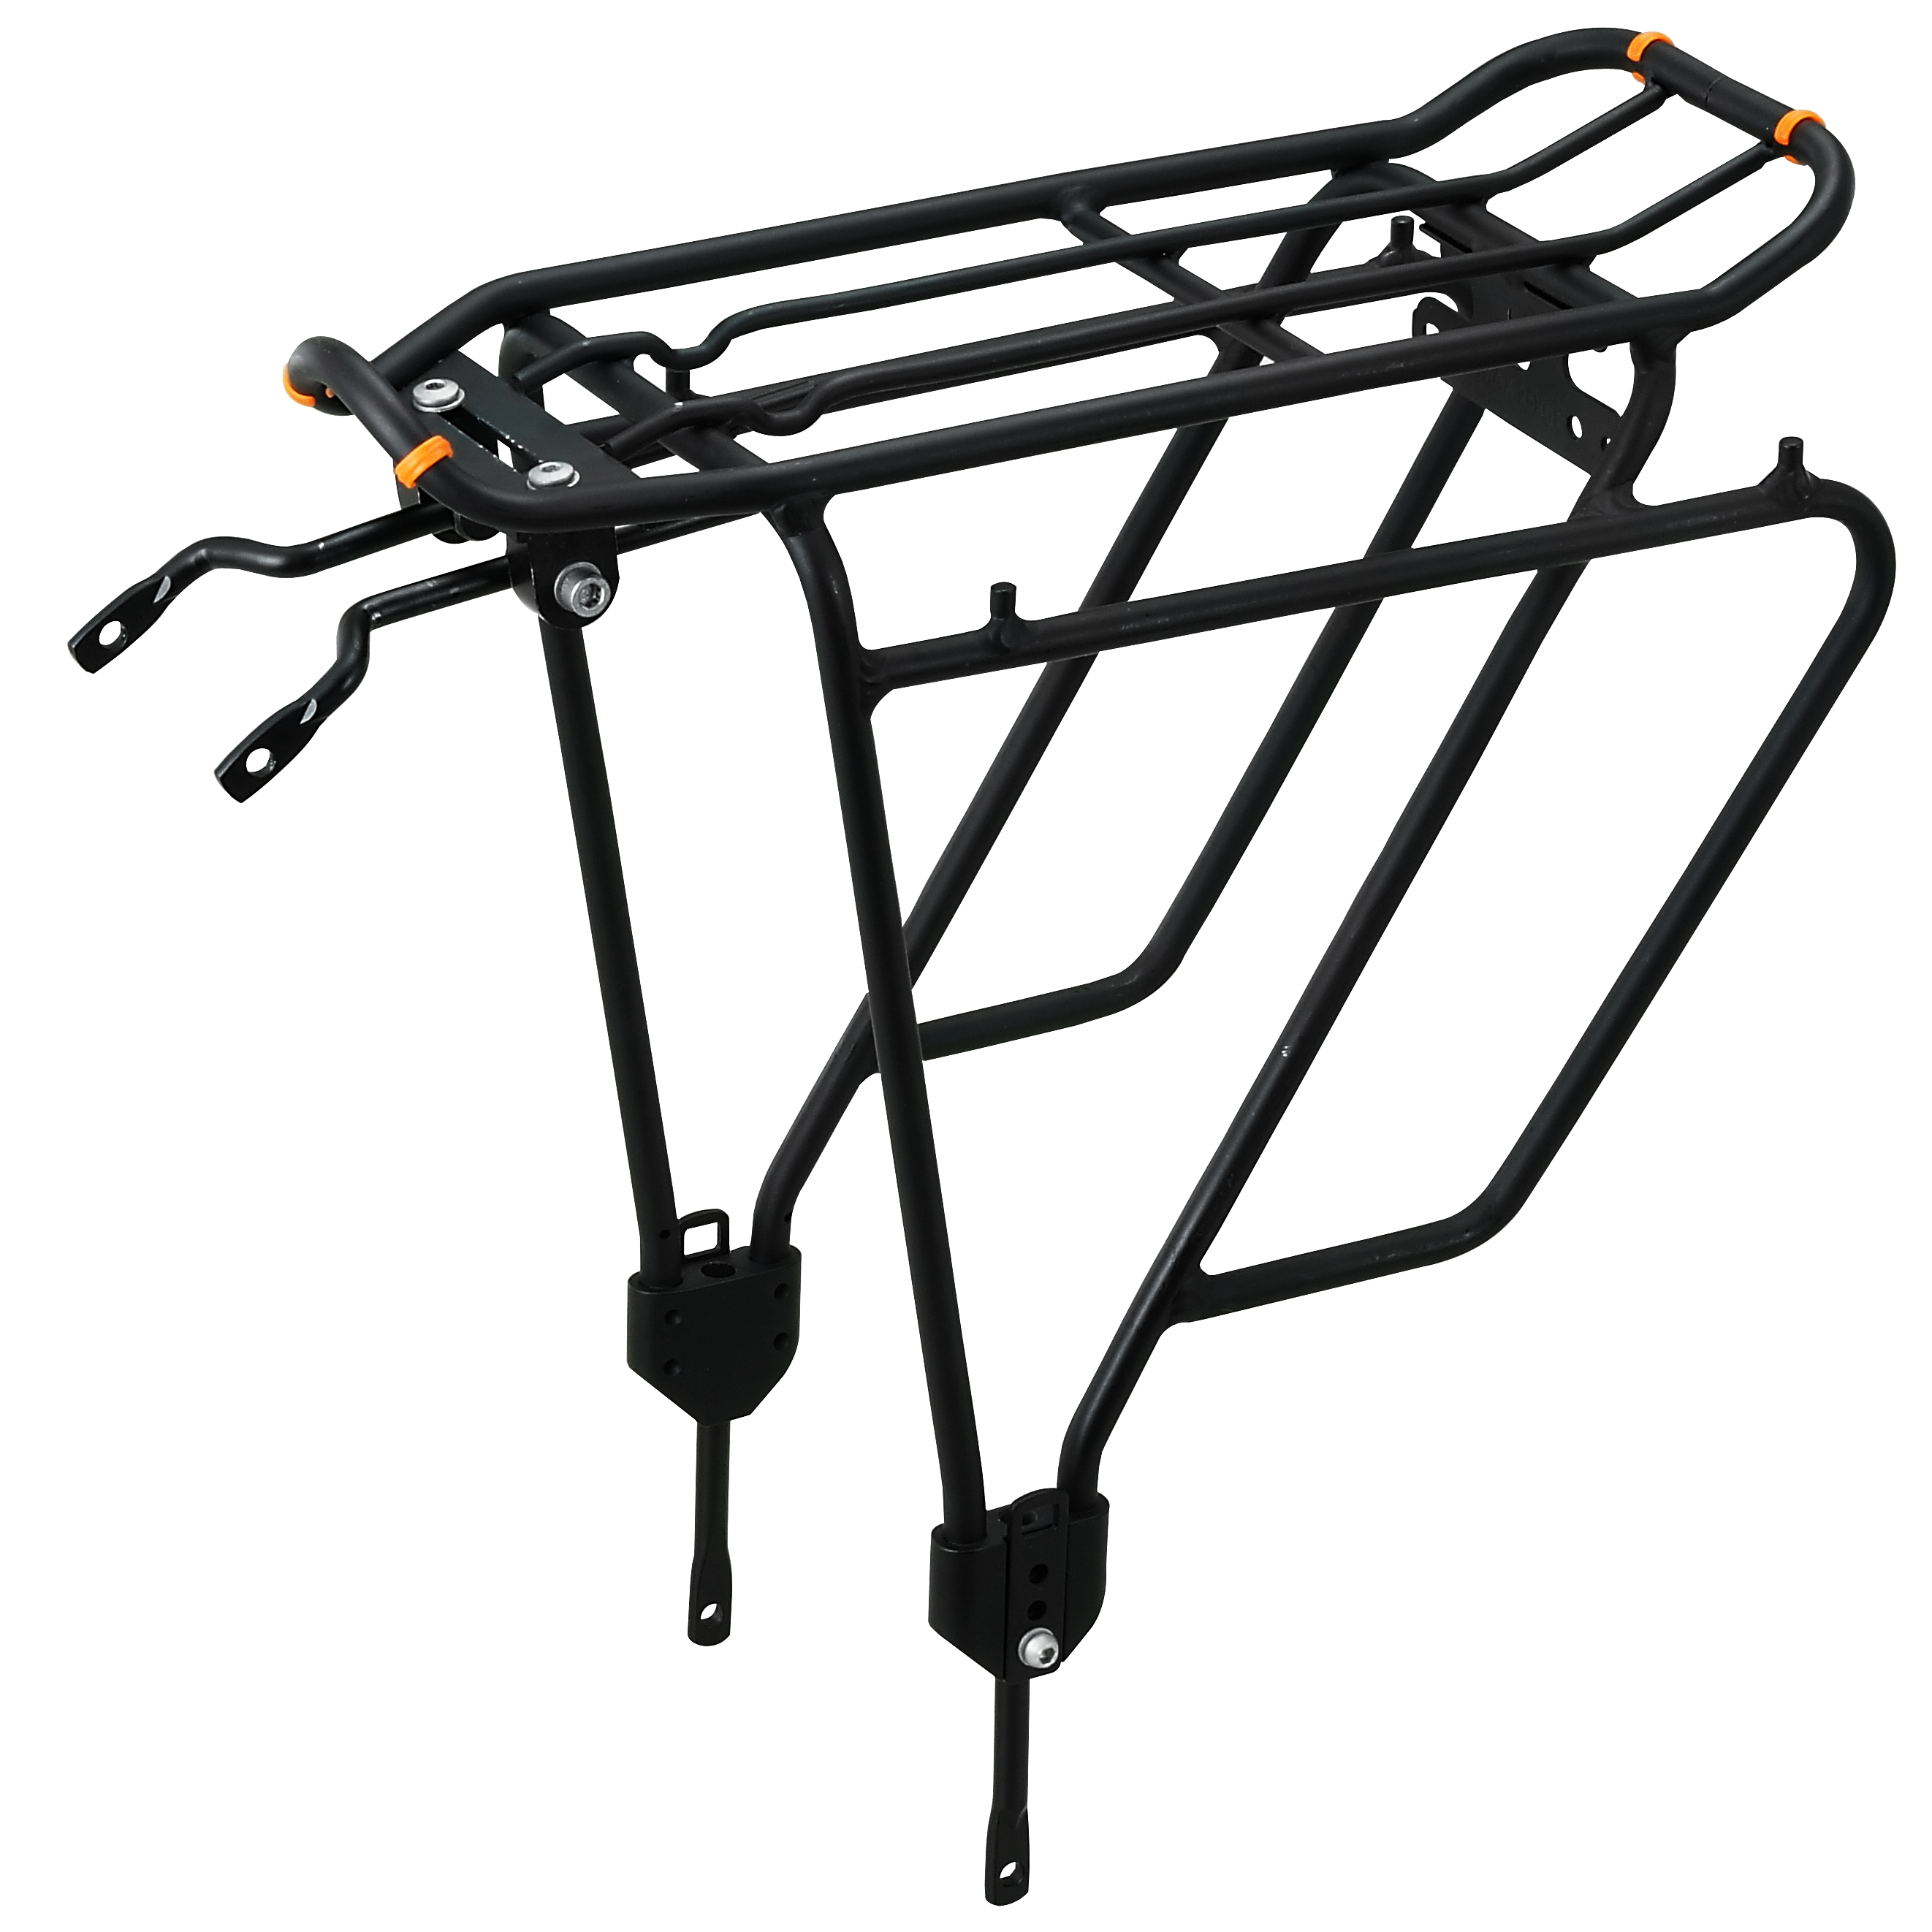 Assembled Rack with Replacement Rings Attached